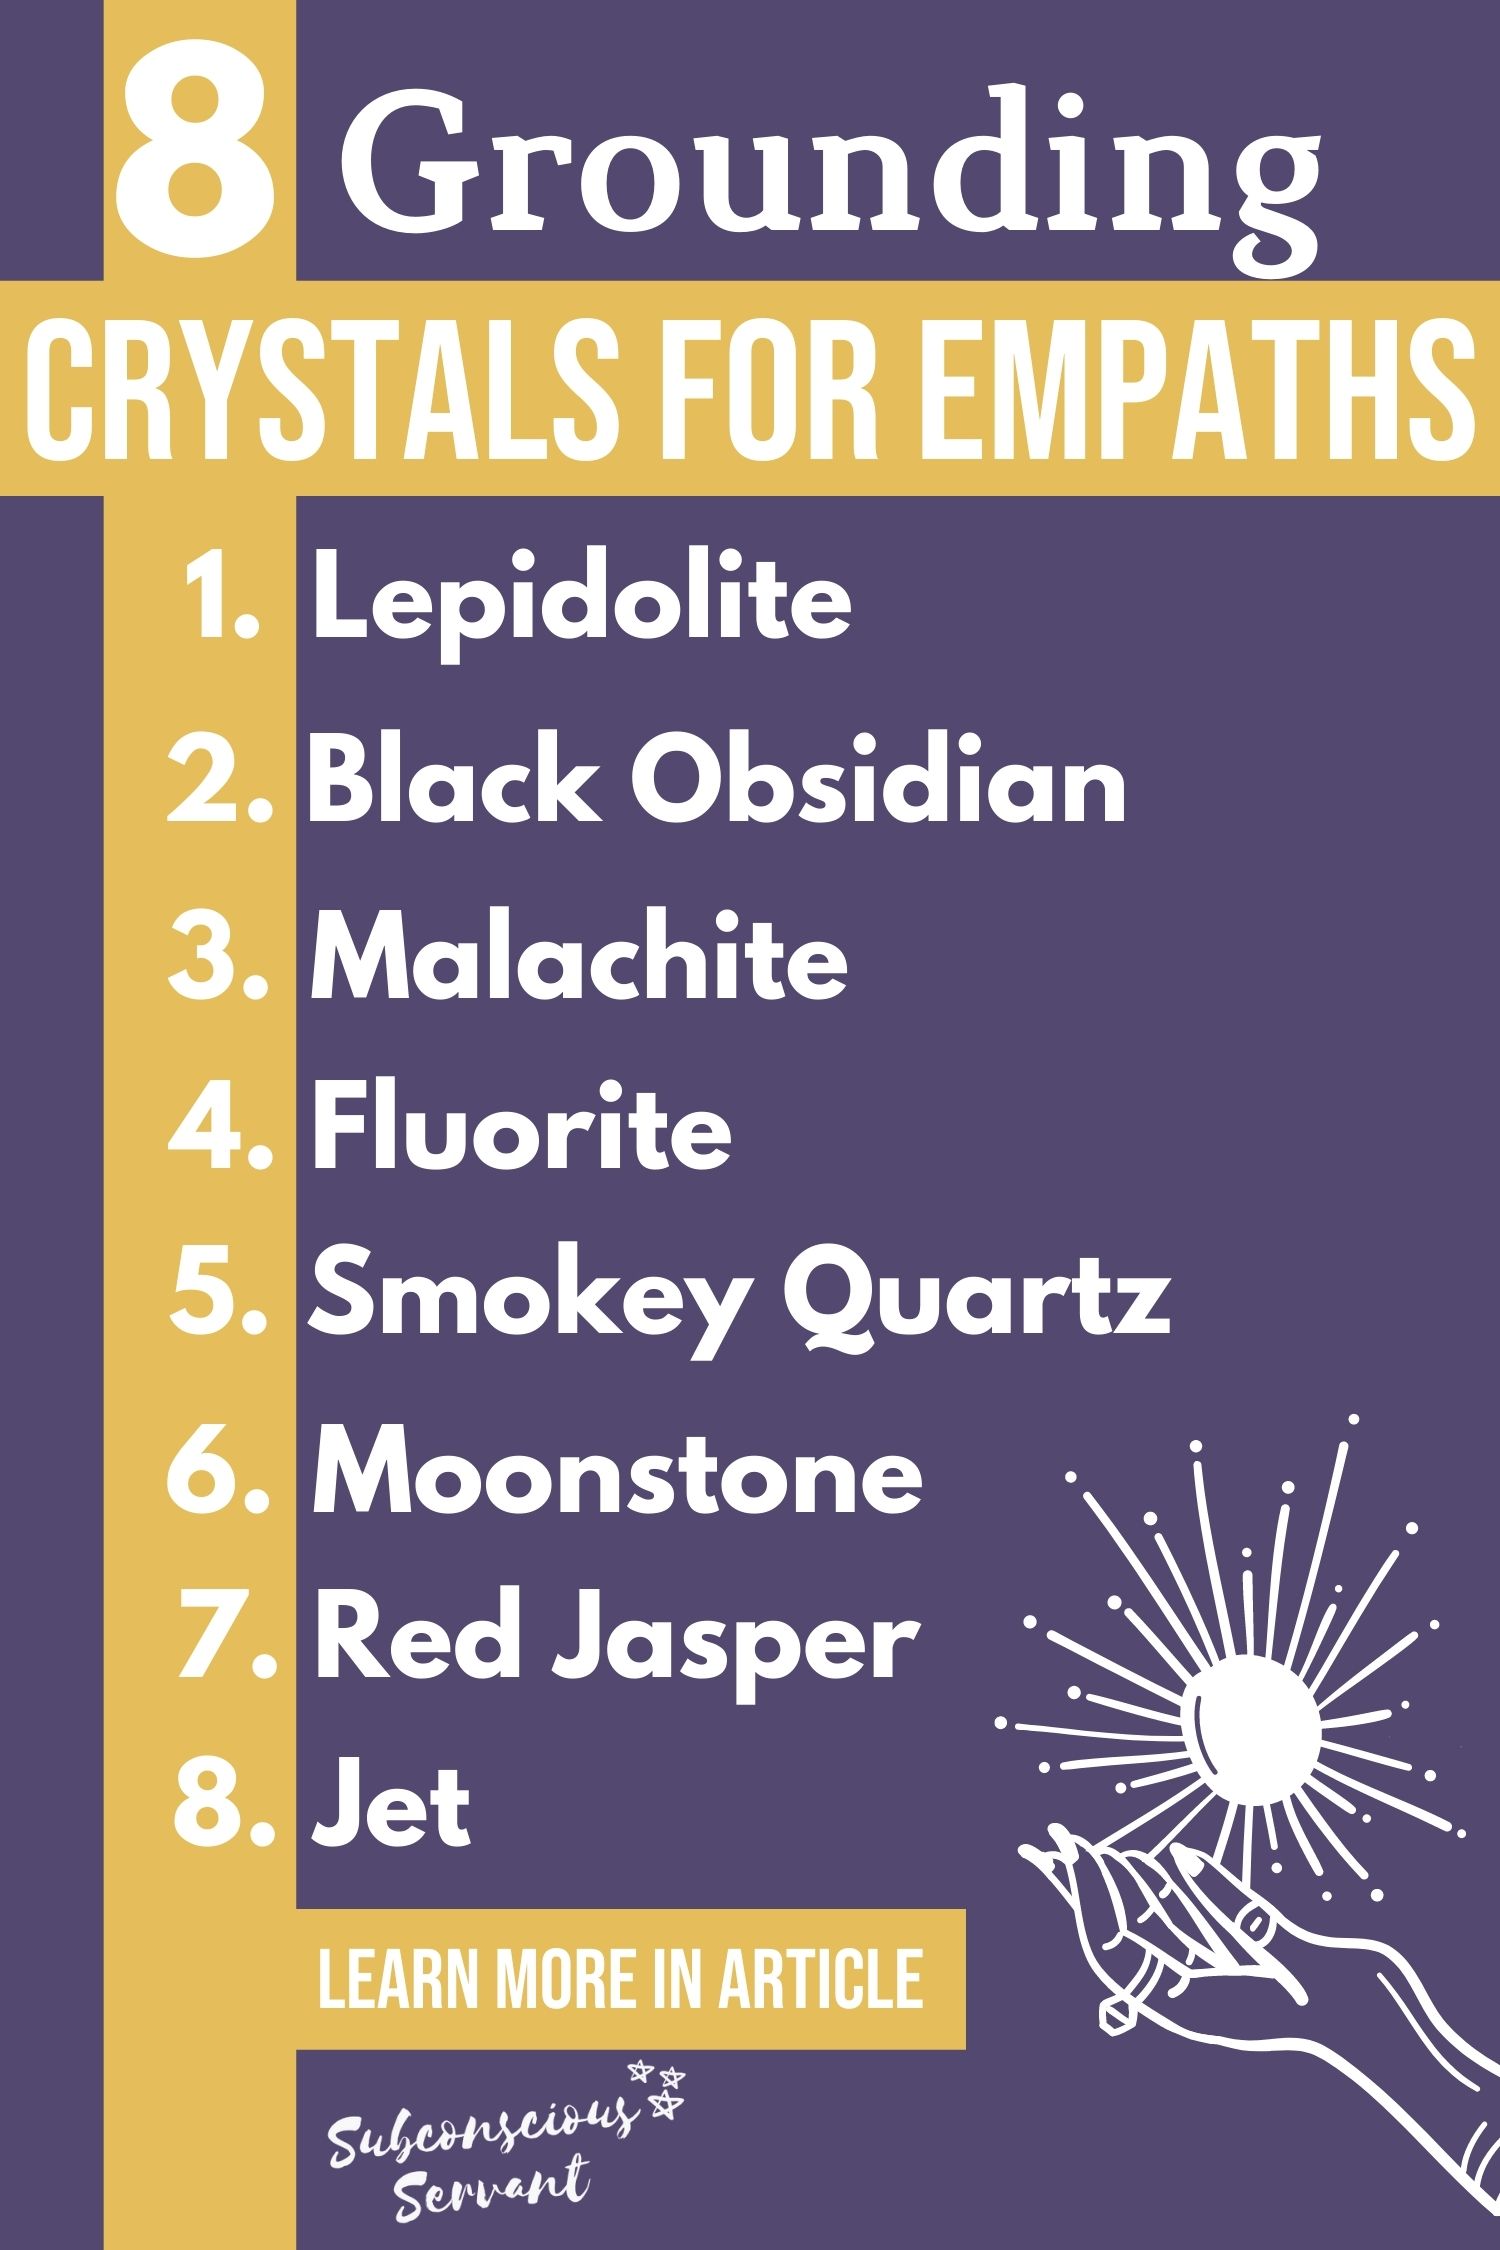 9 BEST Grounding Crystals For Empaths To Use And Why